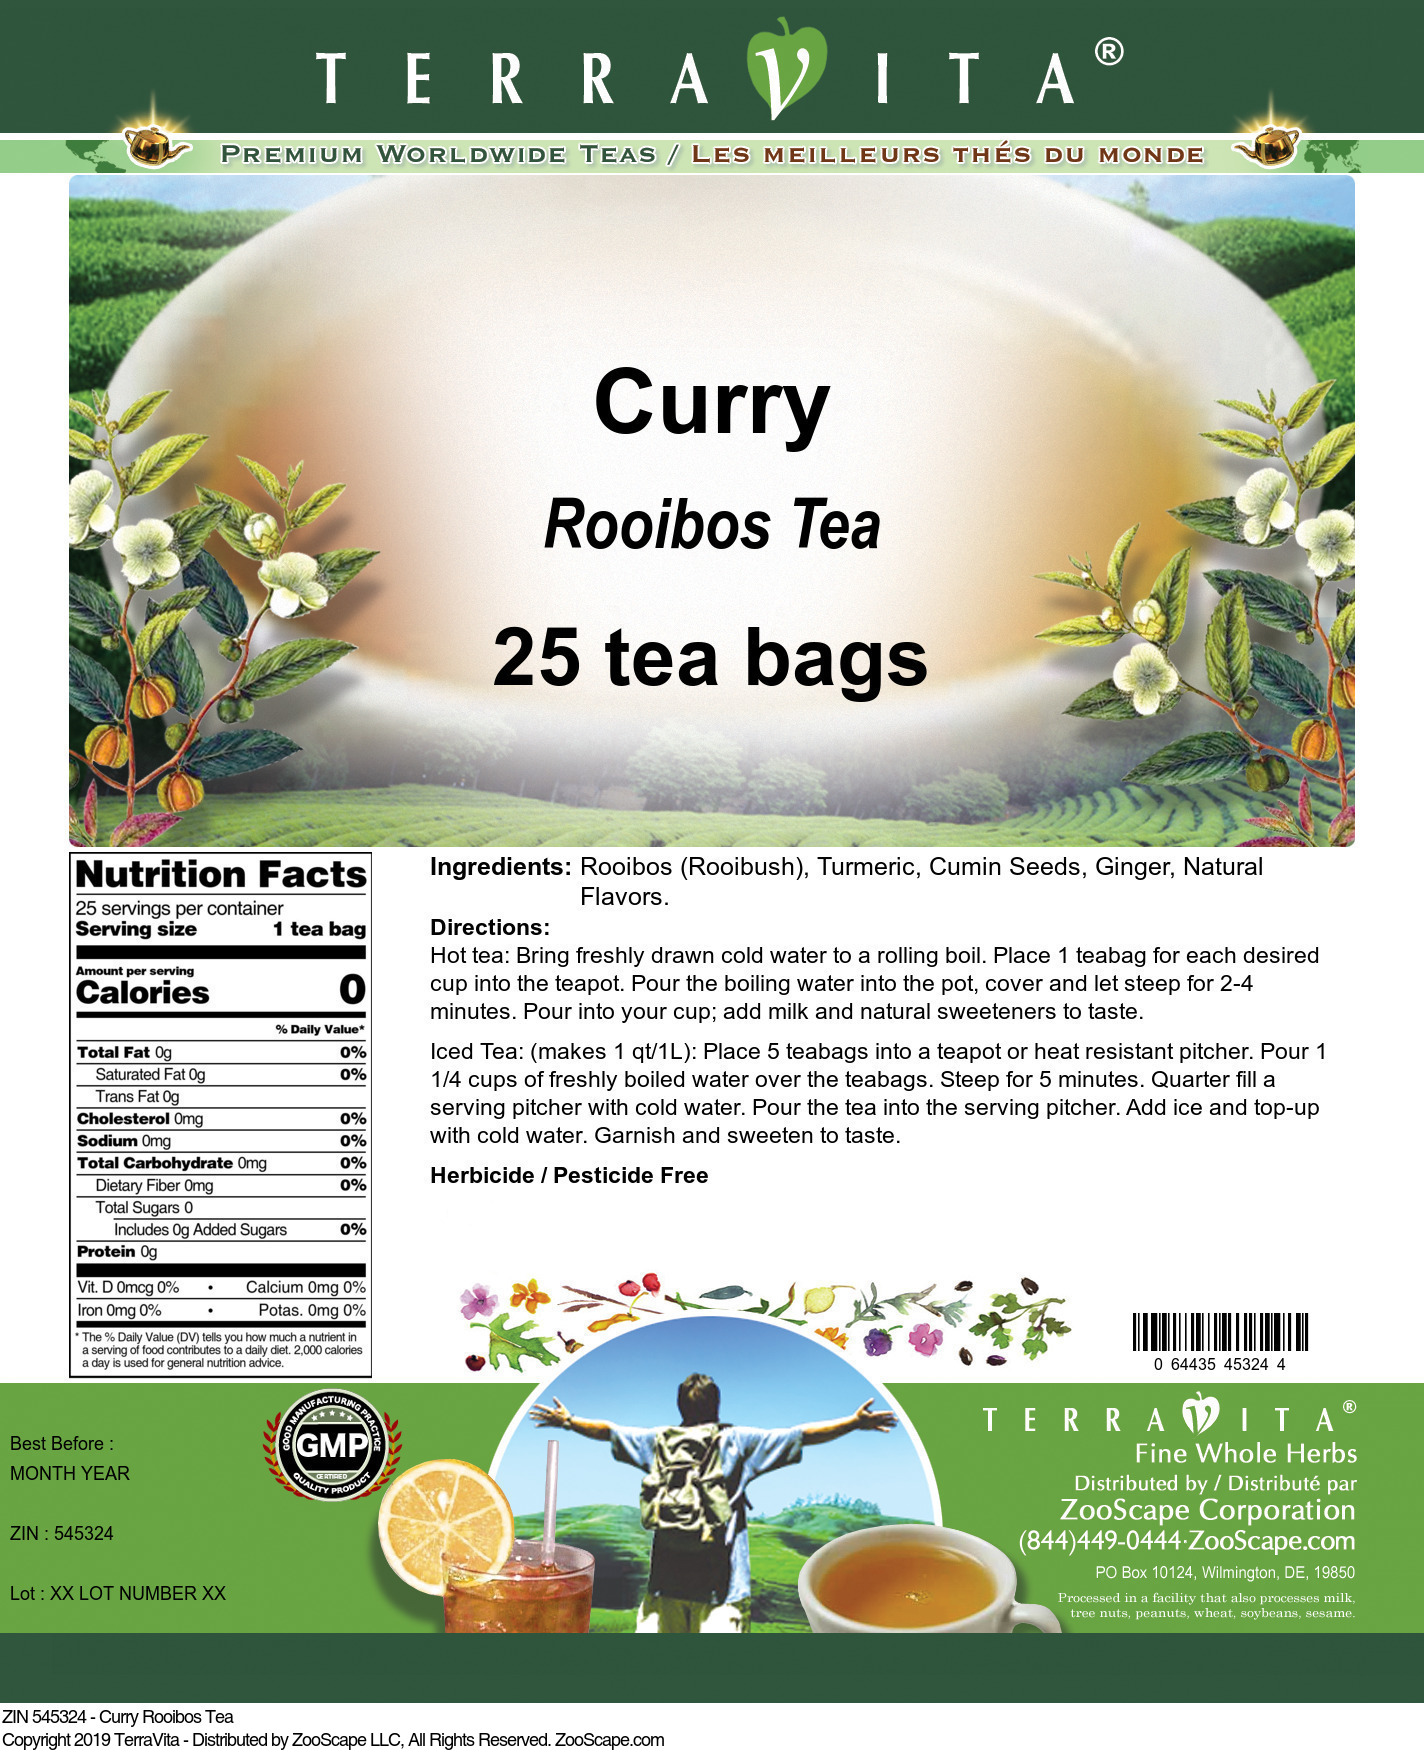 Curry Rooibos Tea - Label